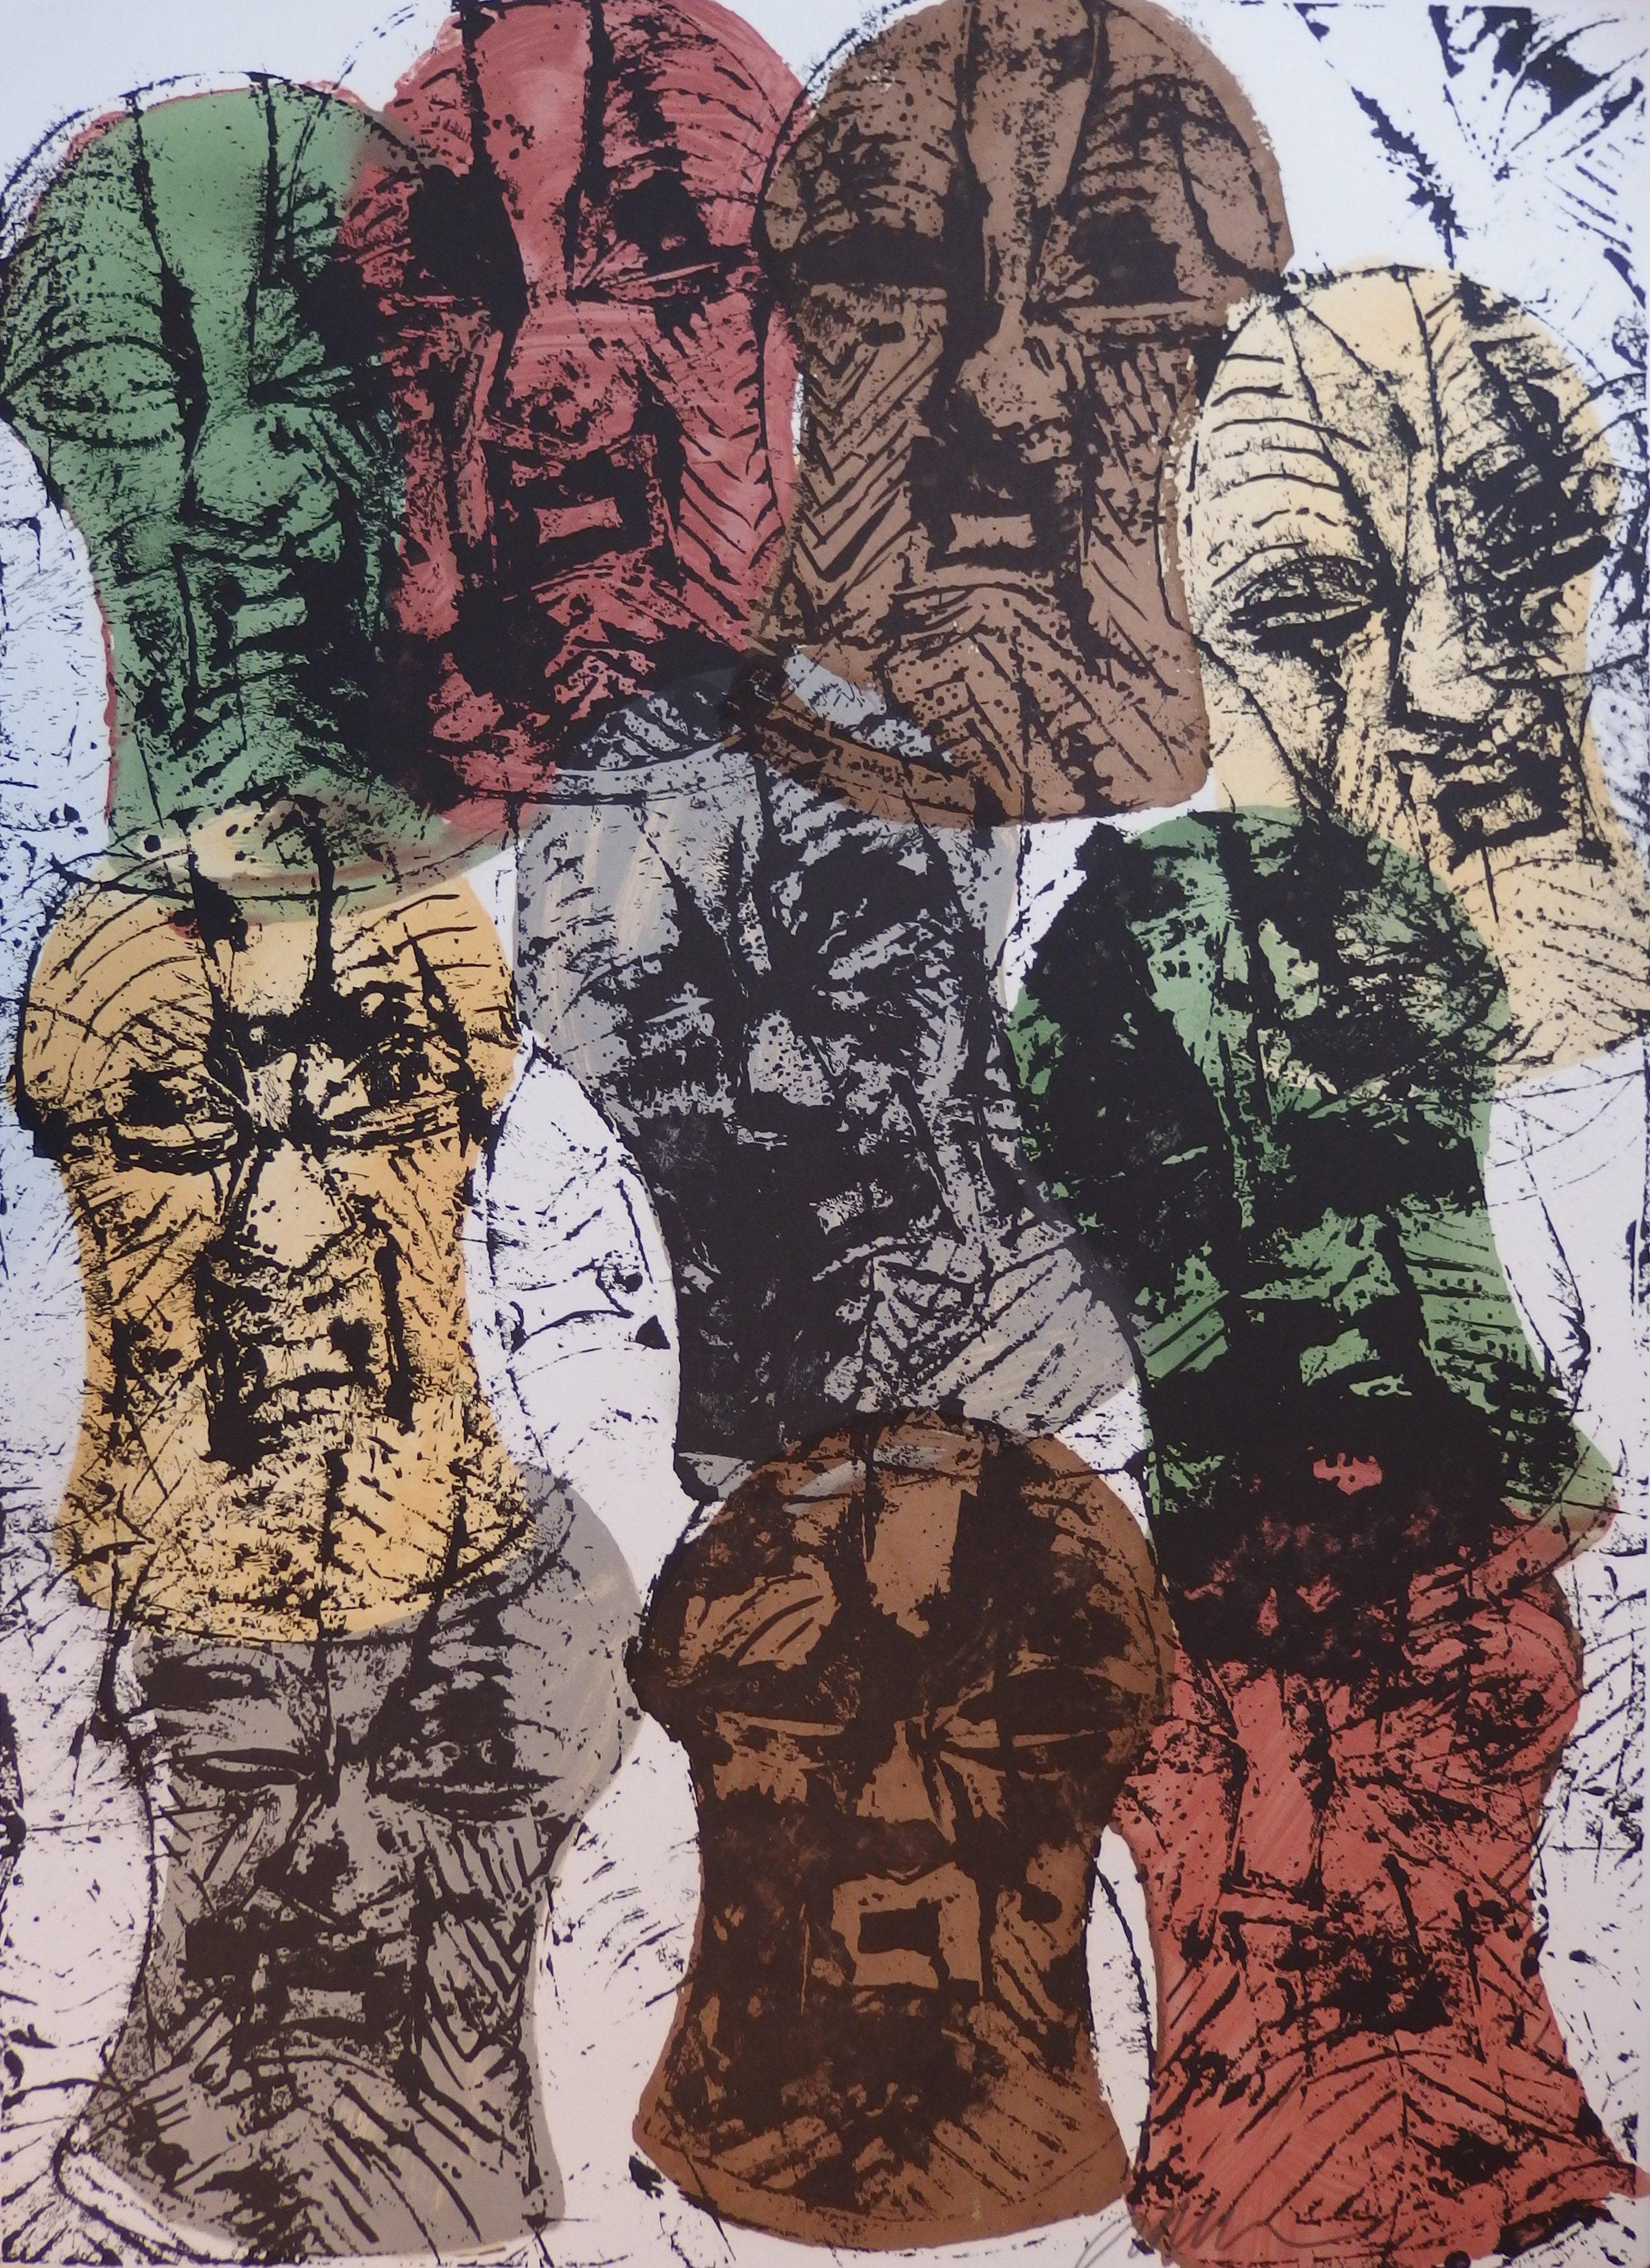 Accumulation of African Songue Masks - Original Handsigned Lithograph